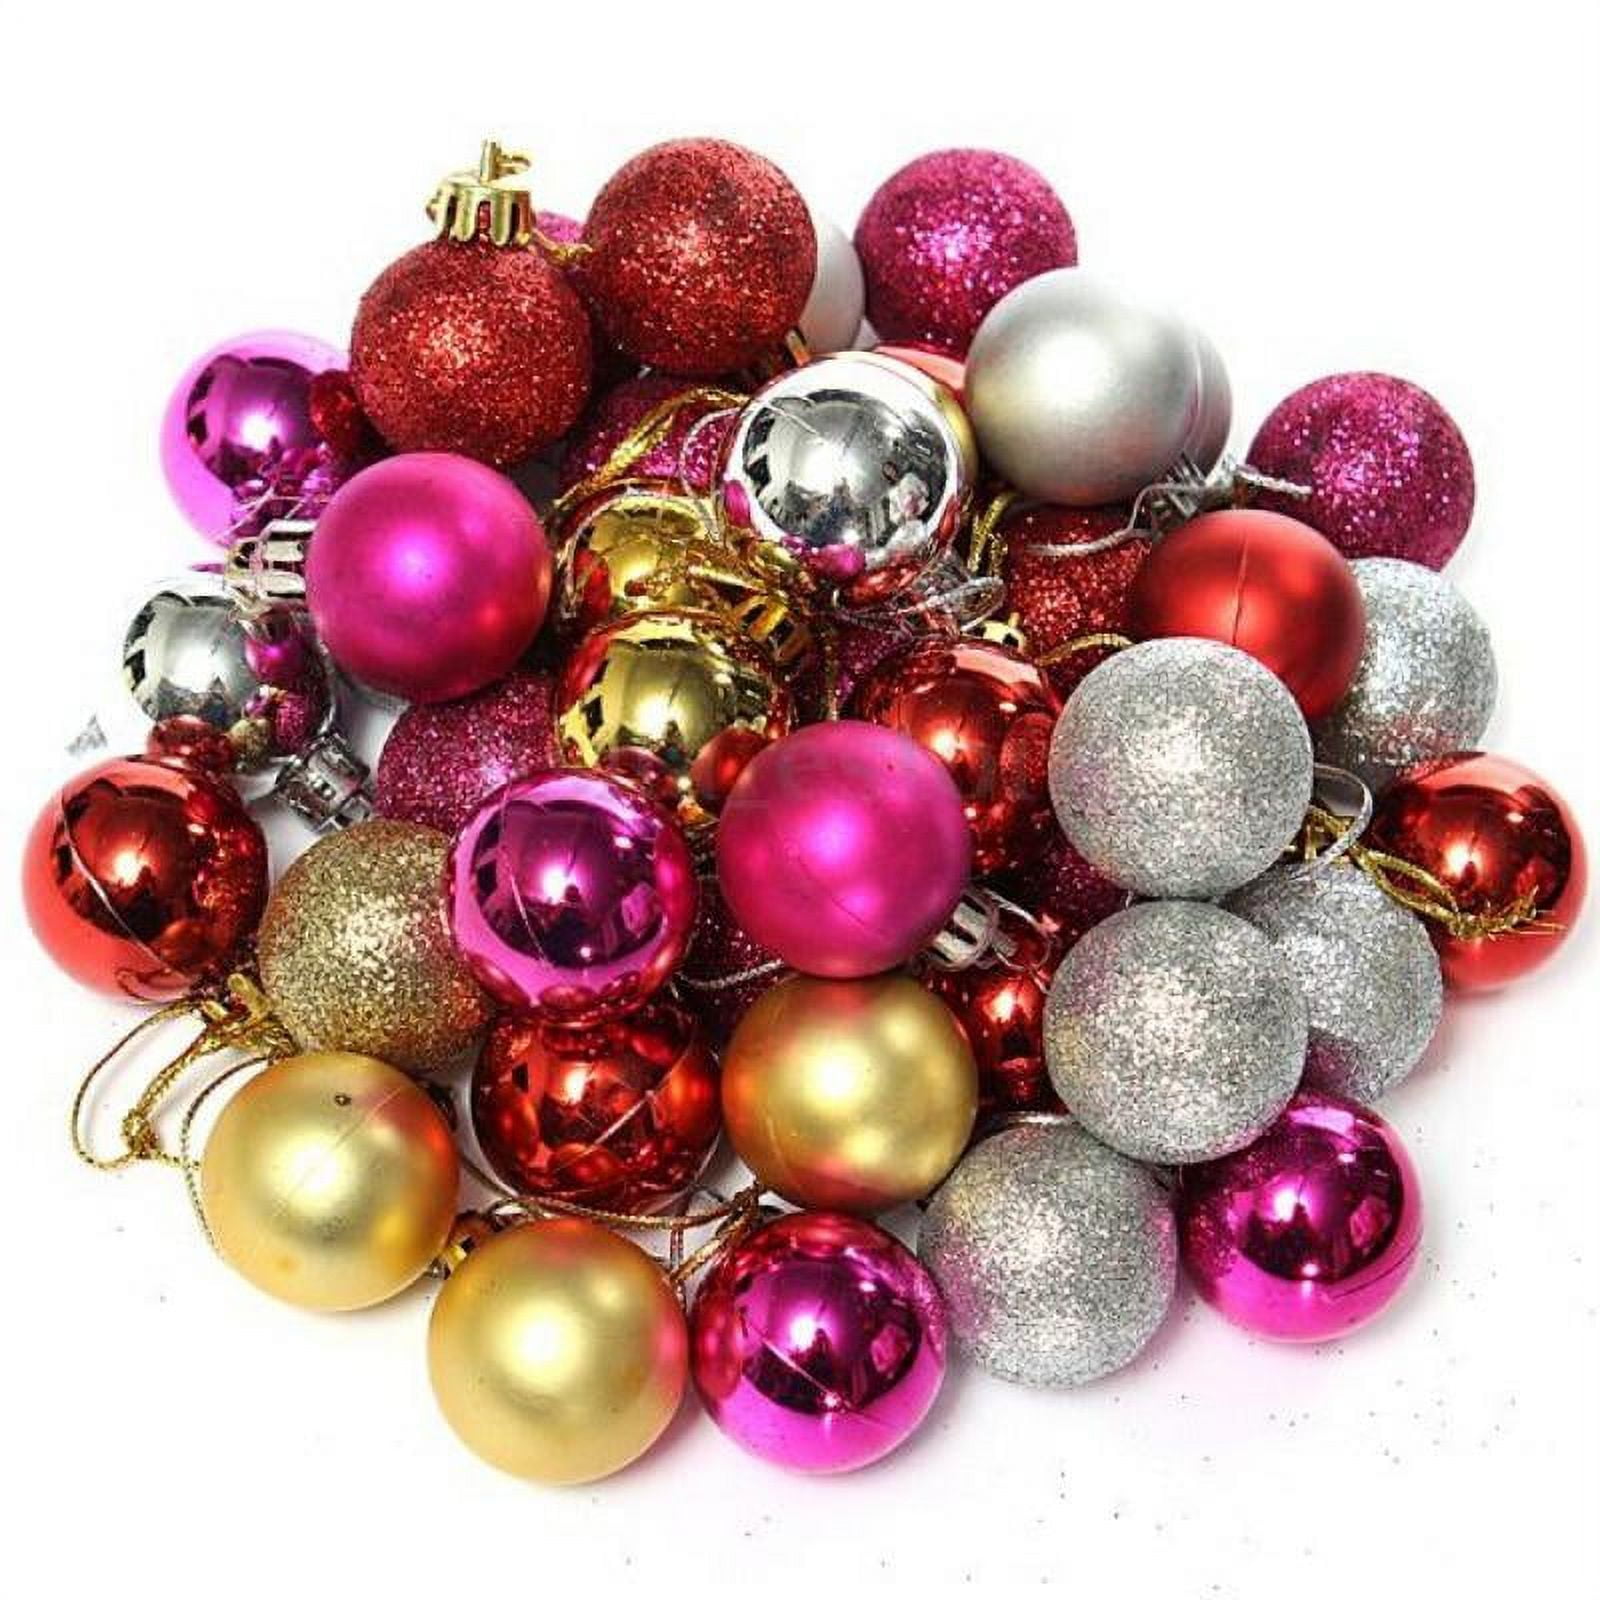 Aitsite 24ct Christmas Tree Ornaments Set 1.57 Inches Mini Shatterproof Holiday Ornaments Balls for Christmas Decorations (Silver)